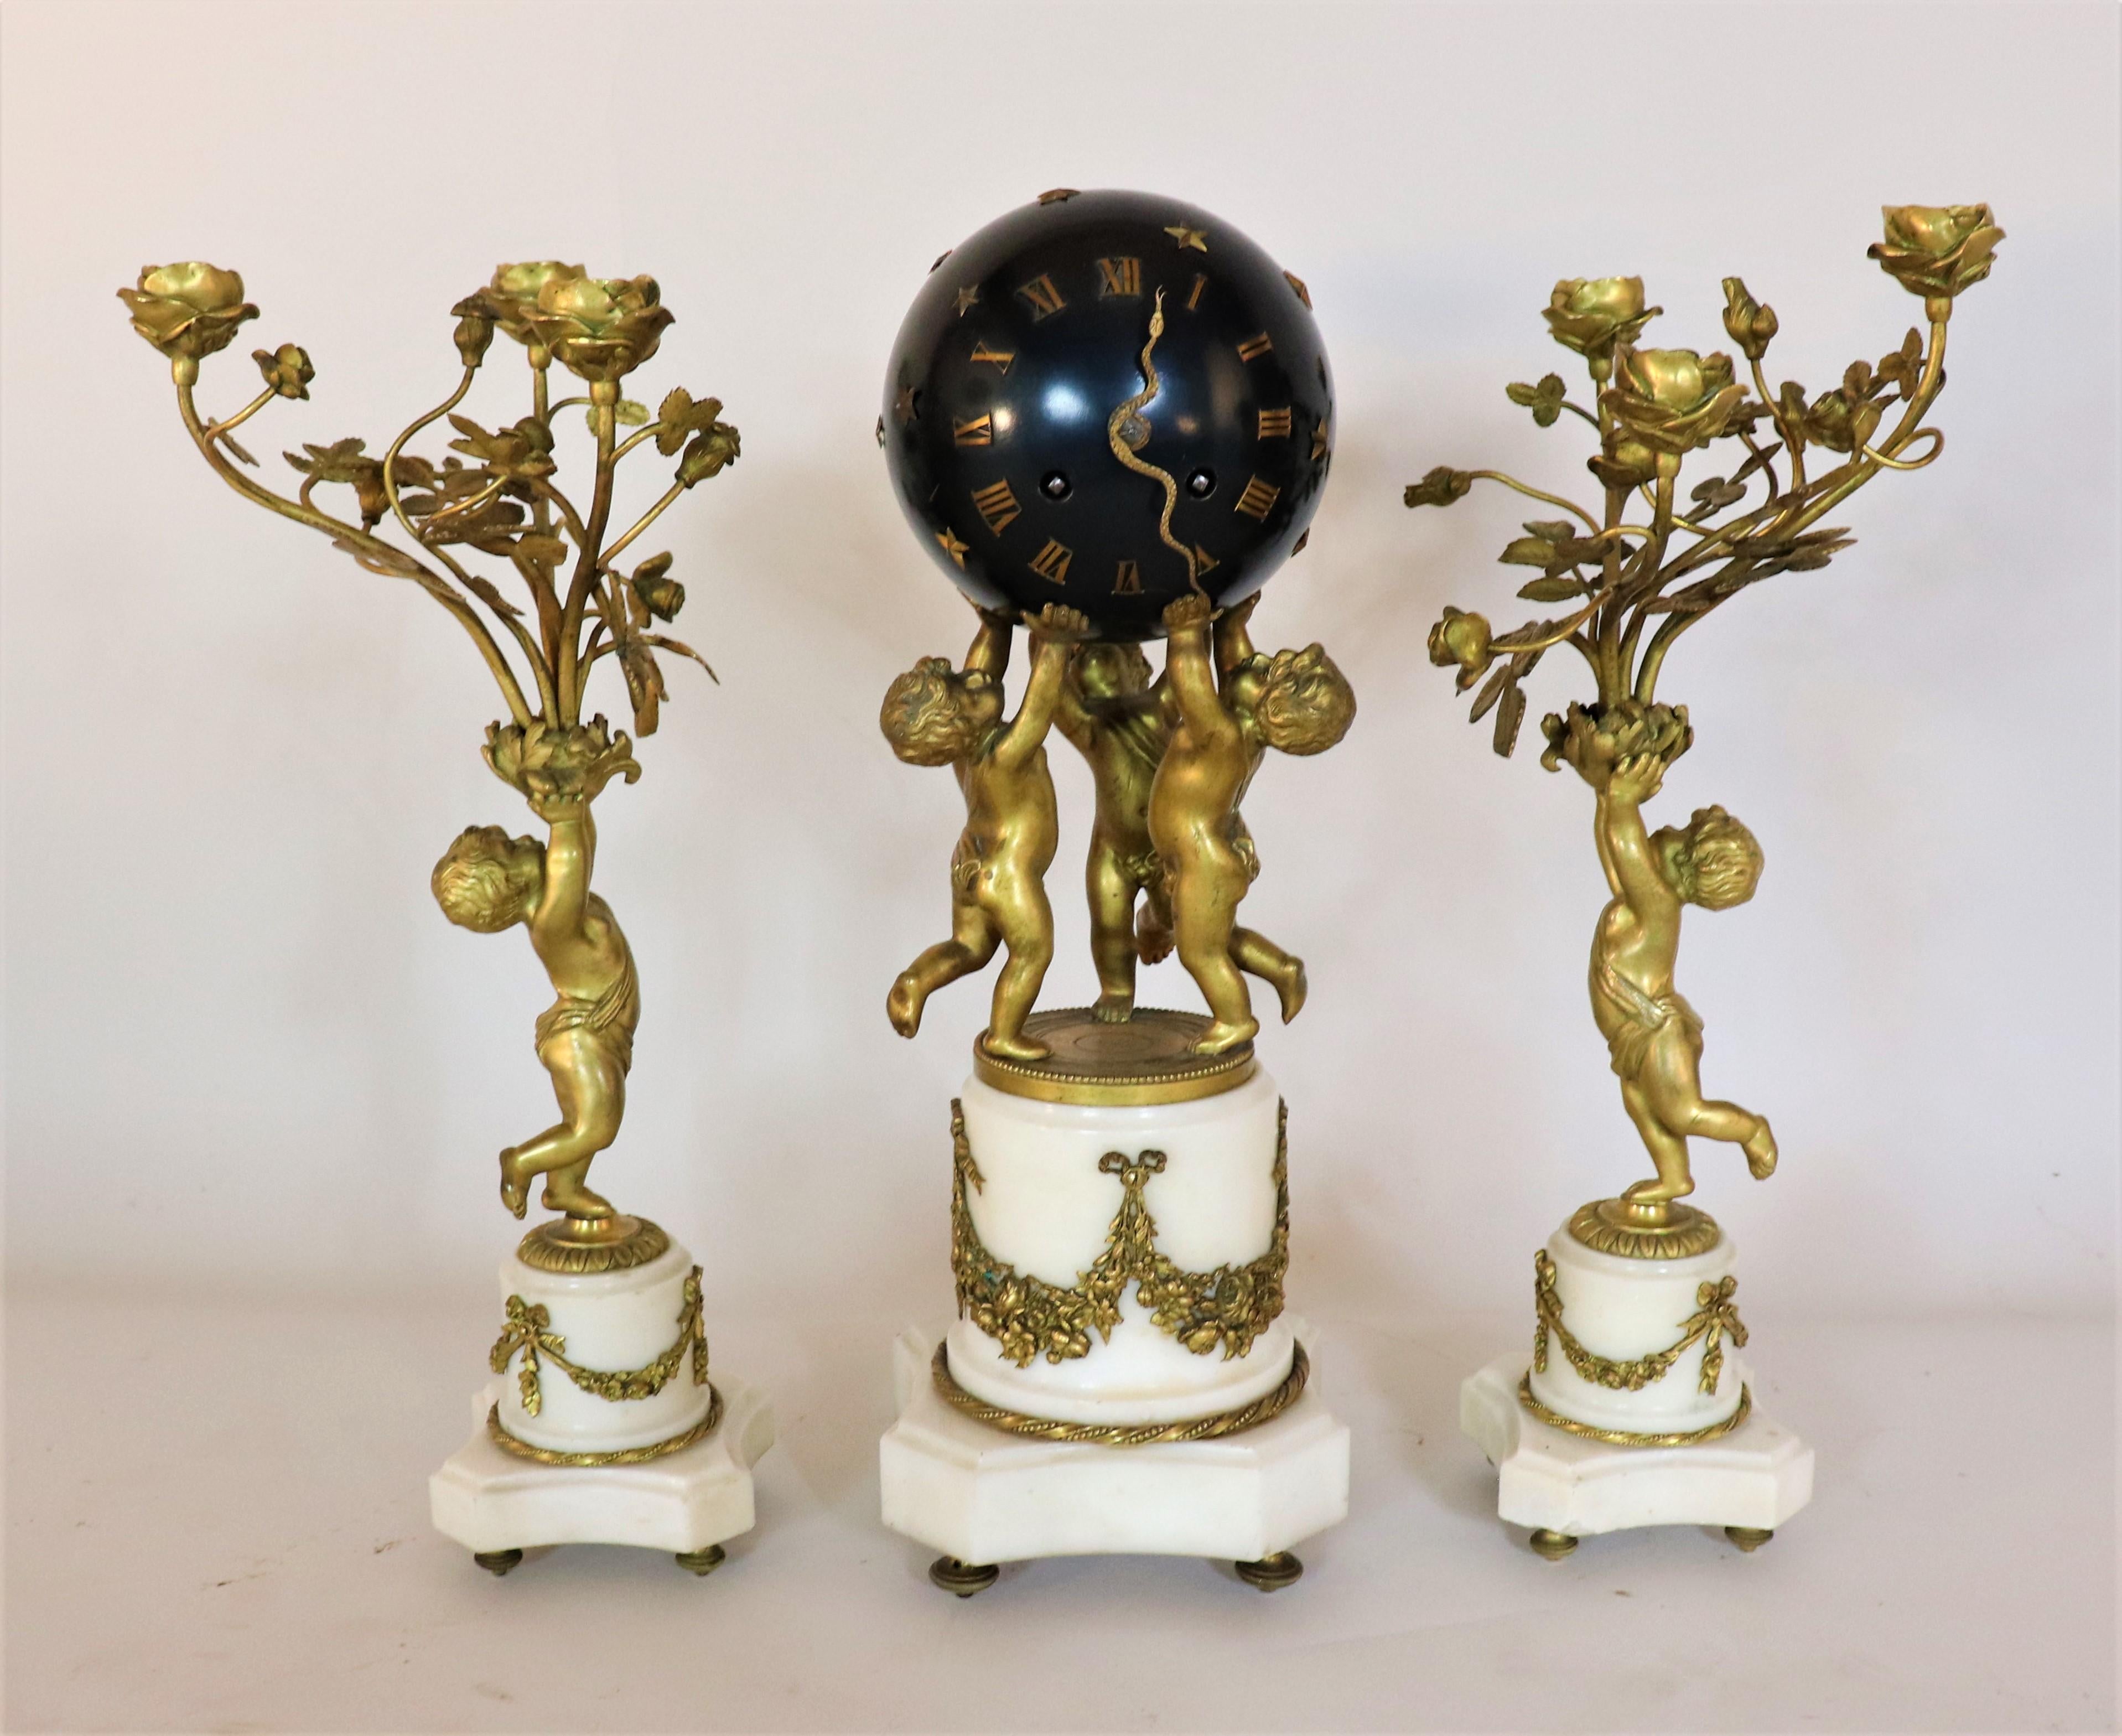 Circa 1890 French Jewel Escape Movement Bronze and Marble Three Piece Clock and Candle Garniture. The clock piece of this set features three bronze putti holding up a black spherical Roman numeral clock. It is what is called a 